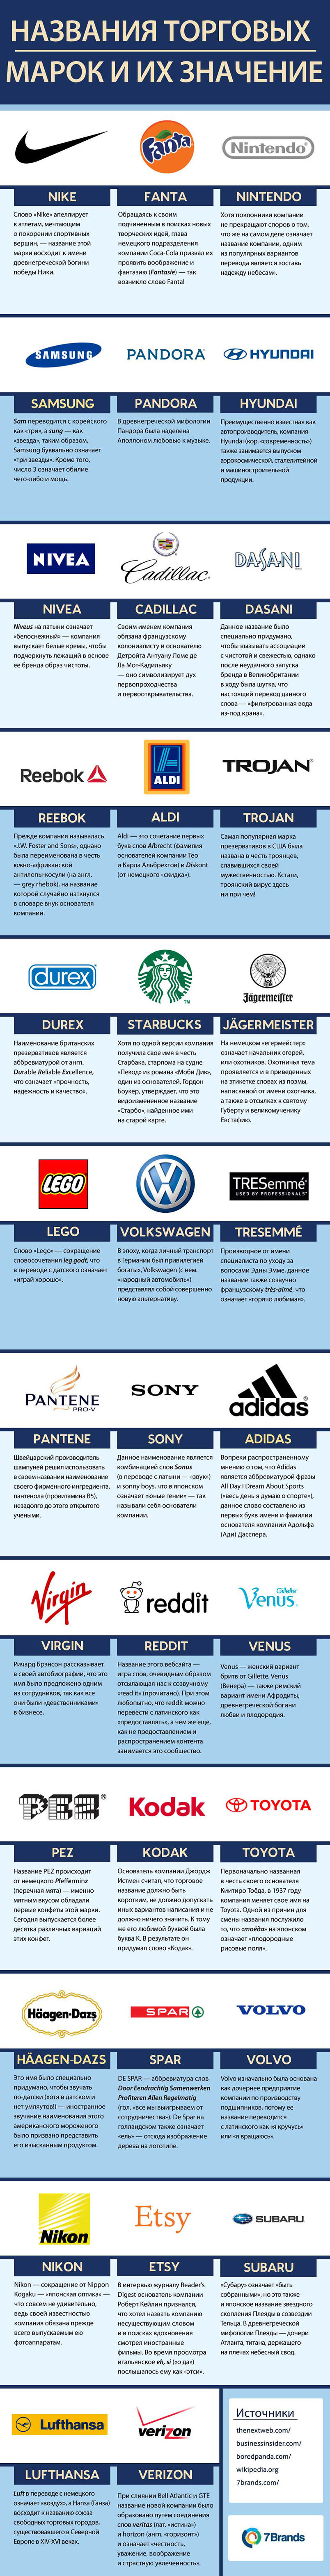 meaning of brand names_RU